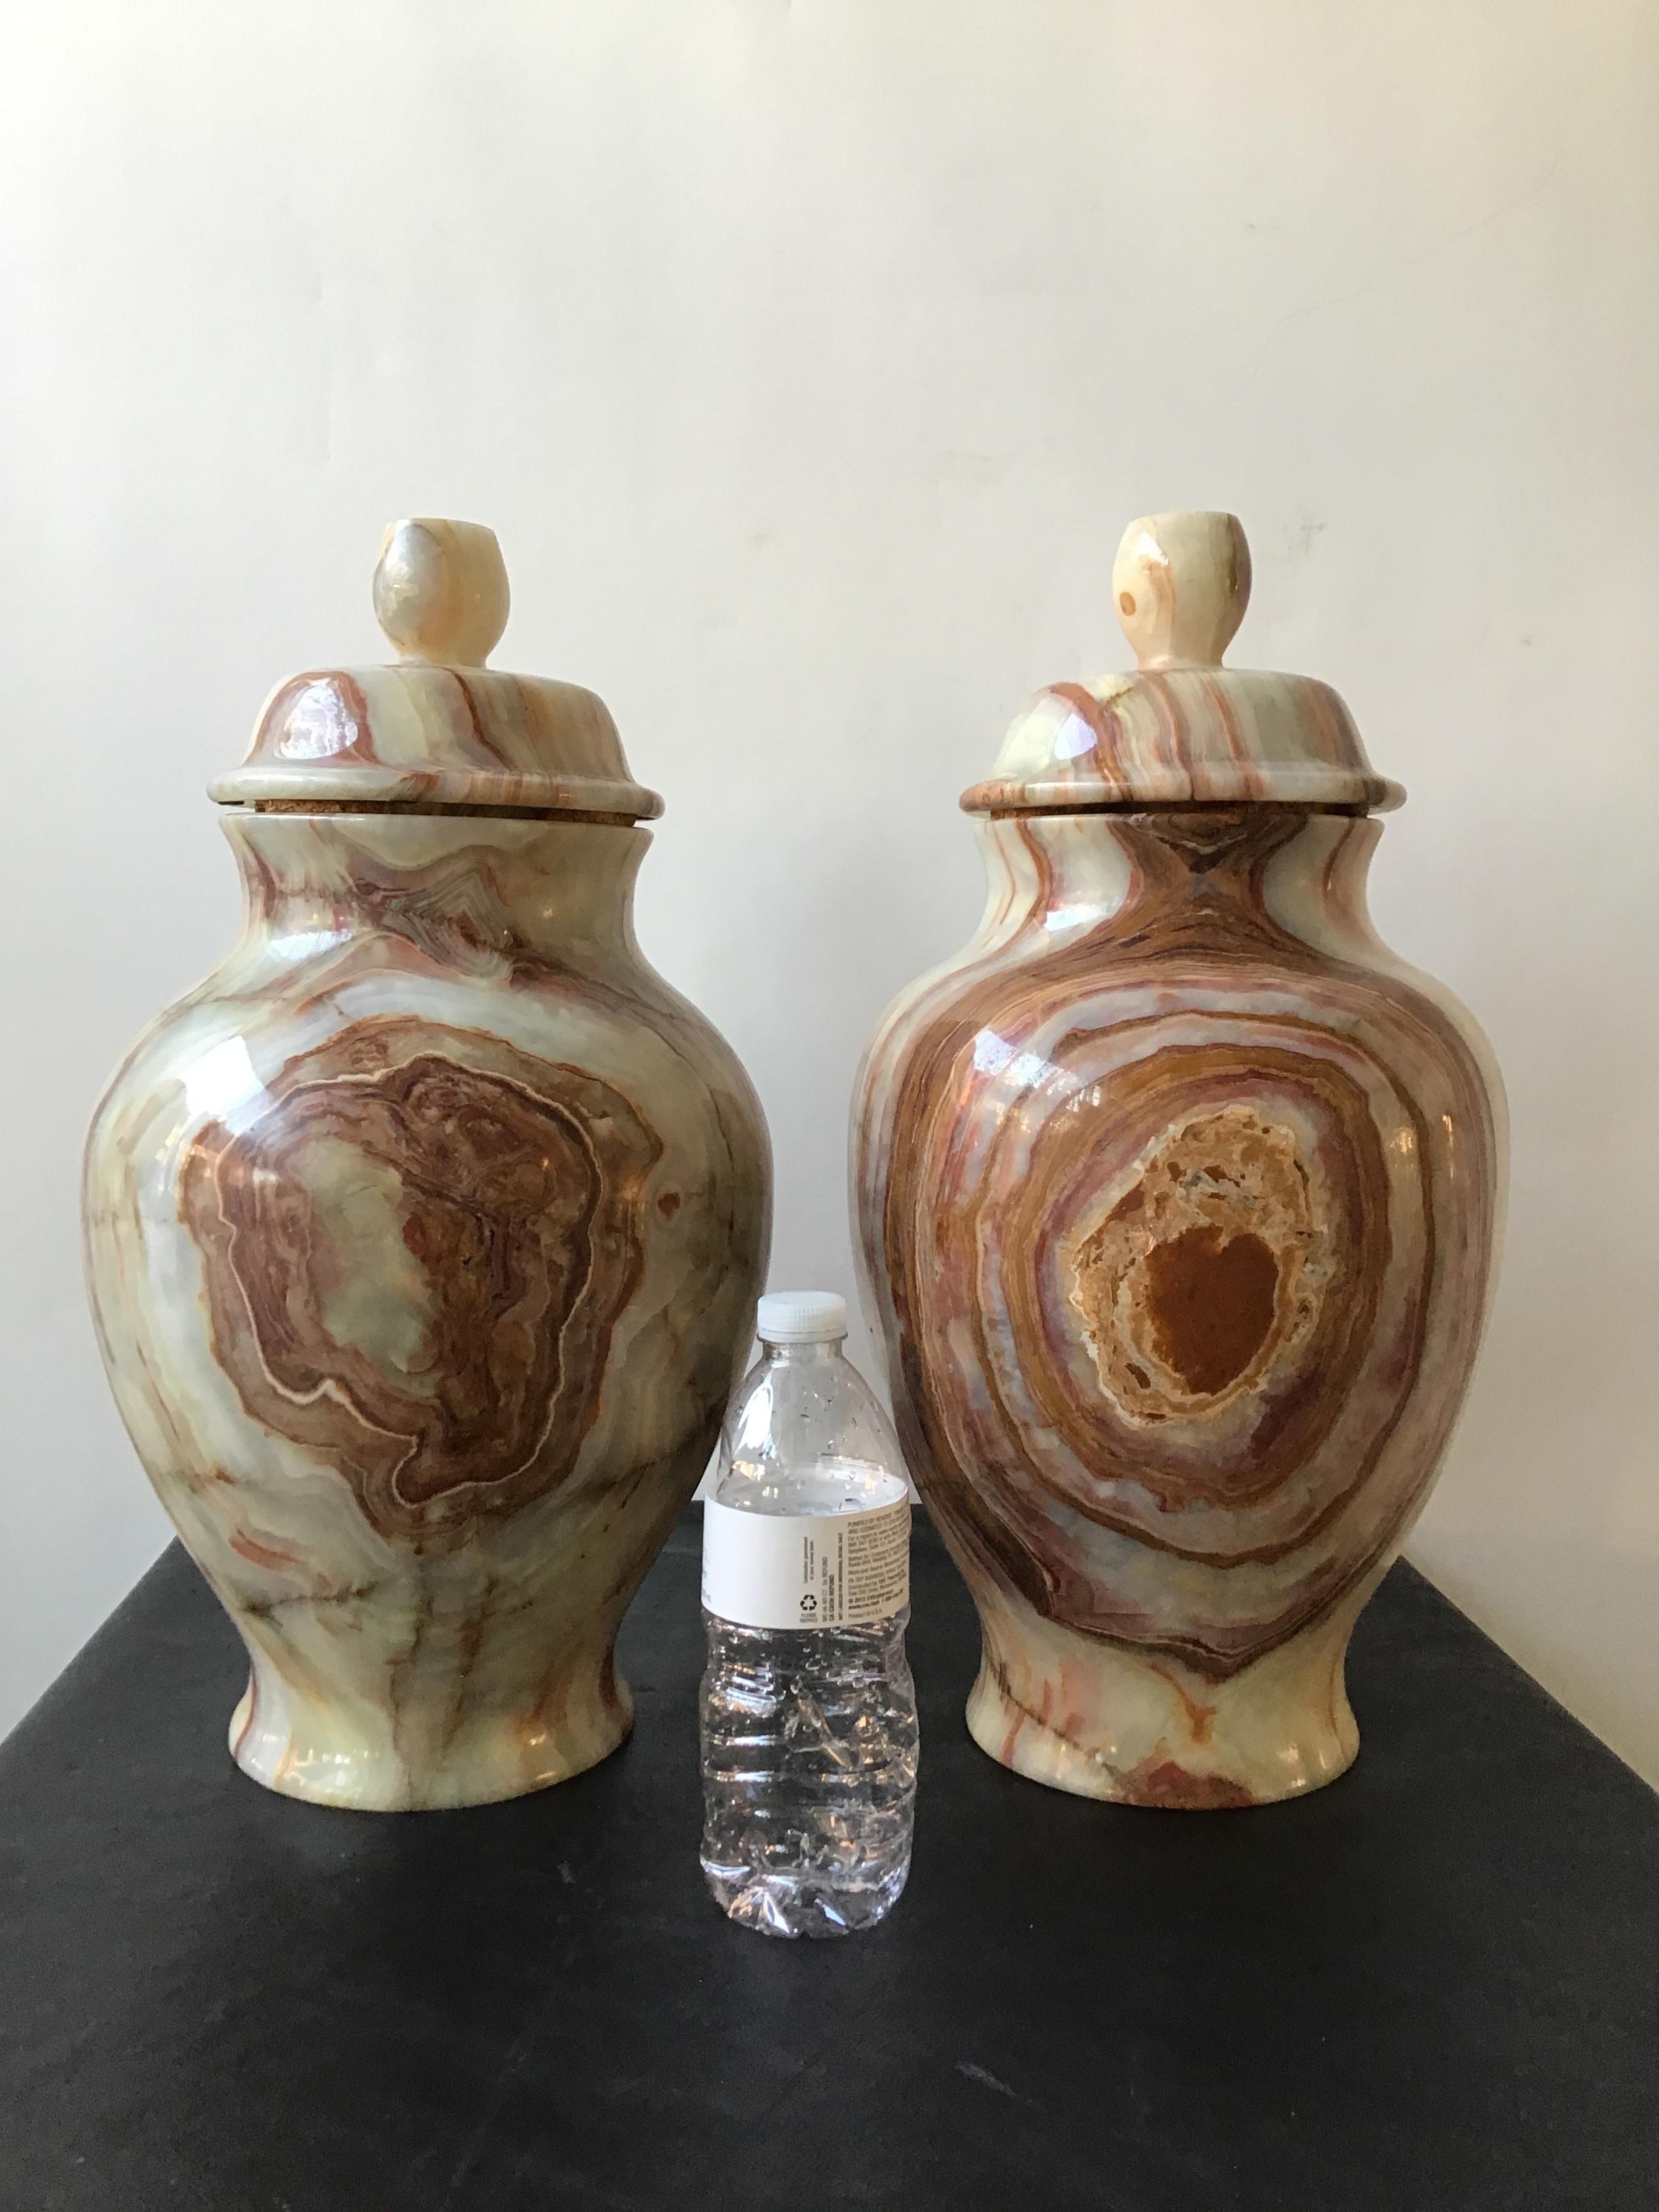 Pair of 1980s onyx urns. Removable lid. Heavy. From a Southampton, NY estate.